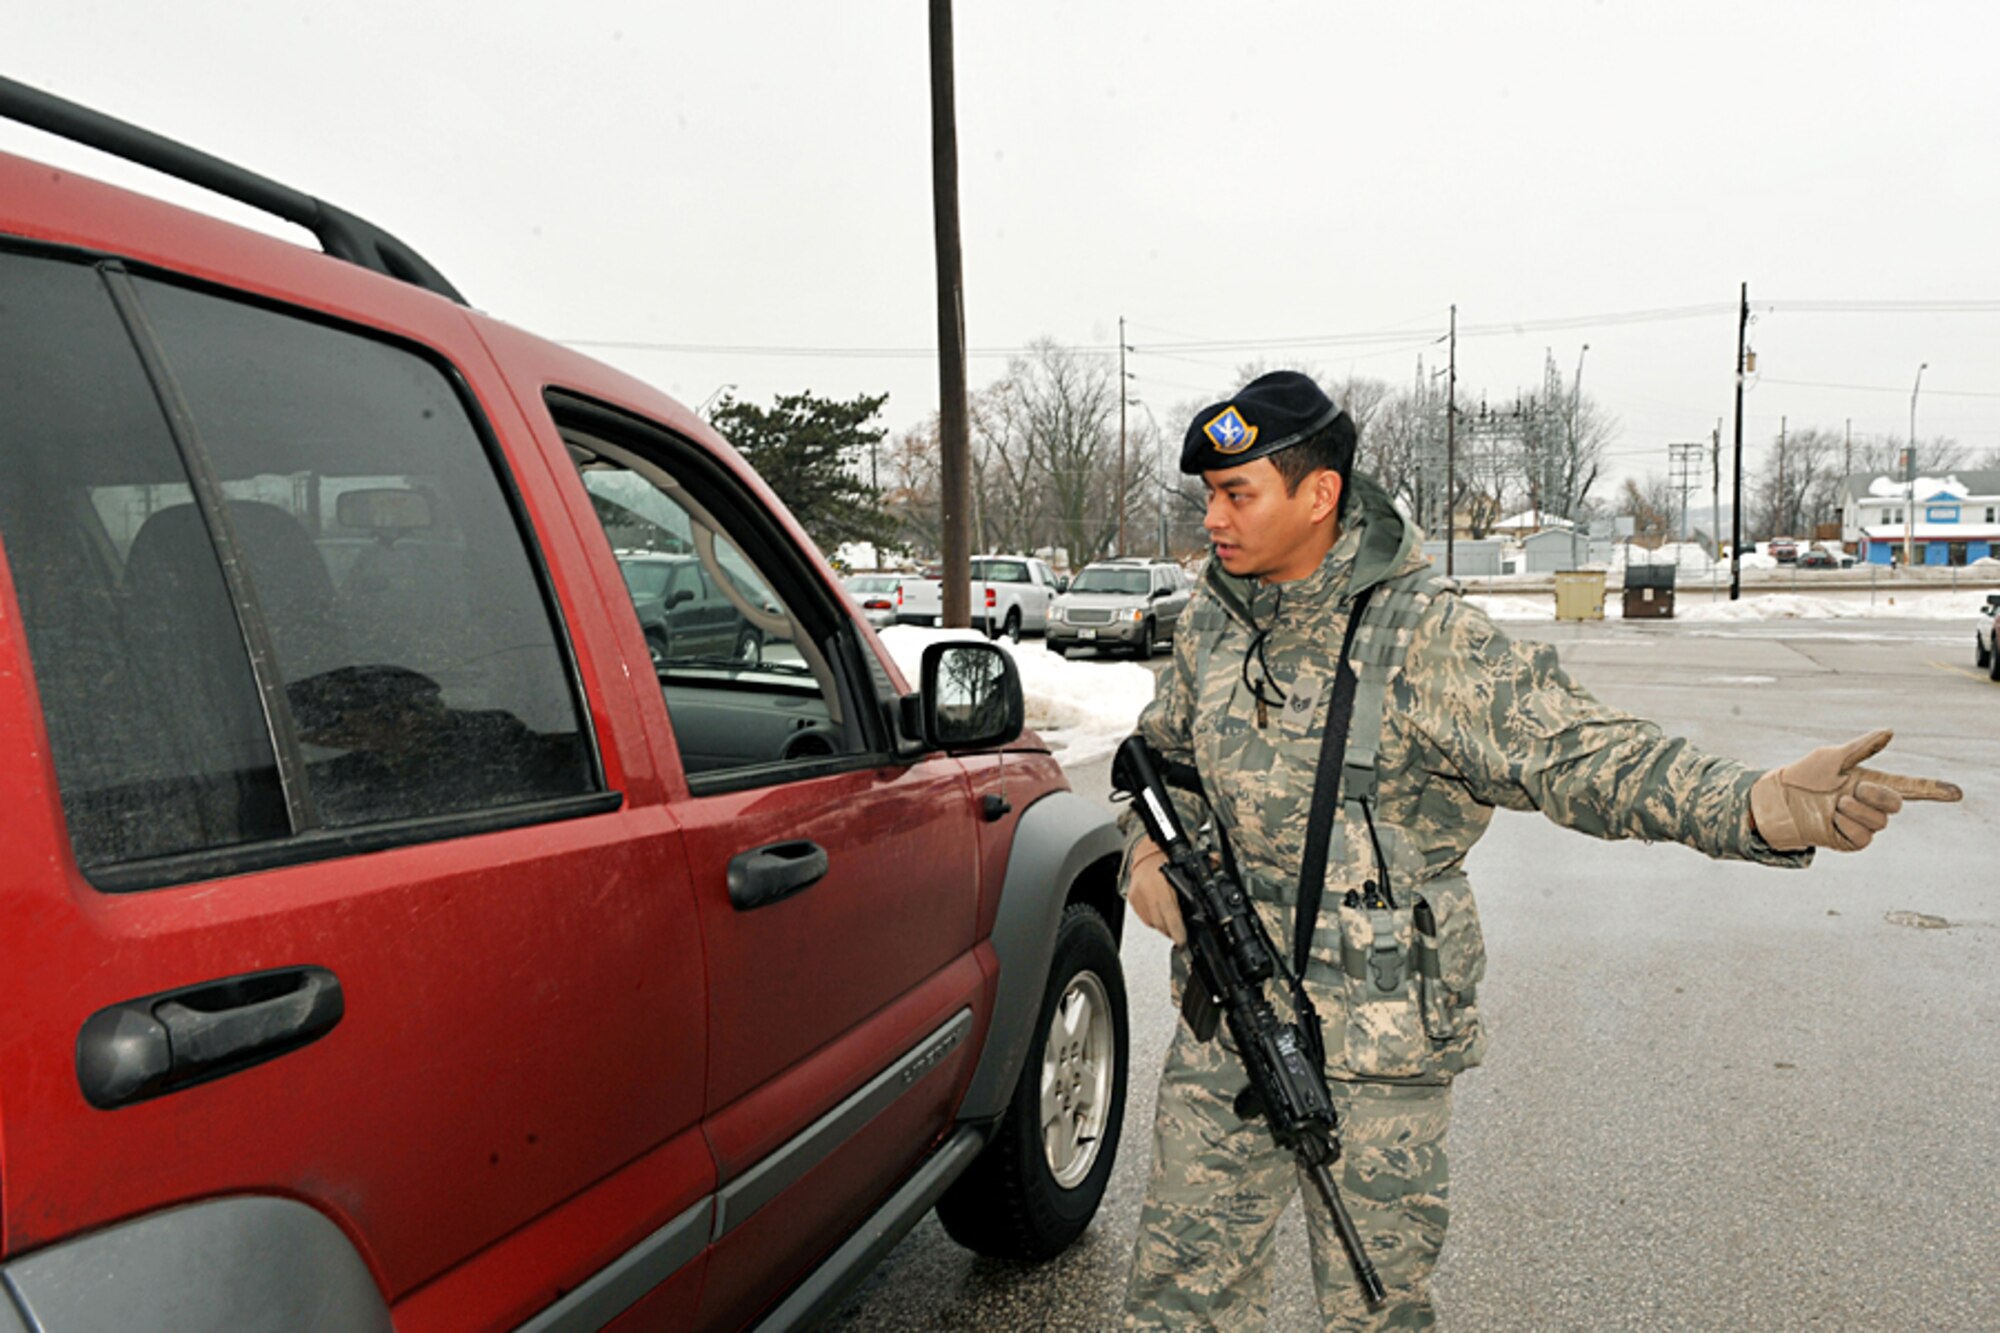 OFFUTT AIR FORCE BASE, Neb. - Staff Sgt. Ernie Argarin, with the 55th Security Forces Squadron, directs a driver at an entry control point near the community center here during a Point of Distribution exercise Jan. 21.  More than 1,000 active-duty personnel processed through the center to test the 55th Wing's ability to respond to a public health emergency.  Many received their H1N1 inoculation during the event.
U.S. Air Force photo by Charles Haymond
